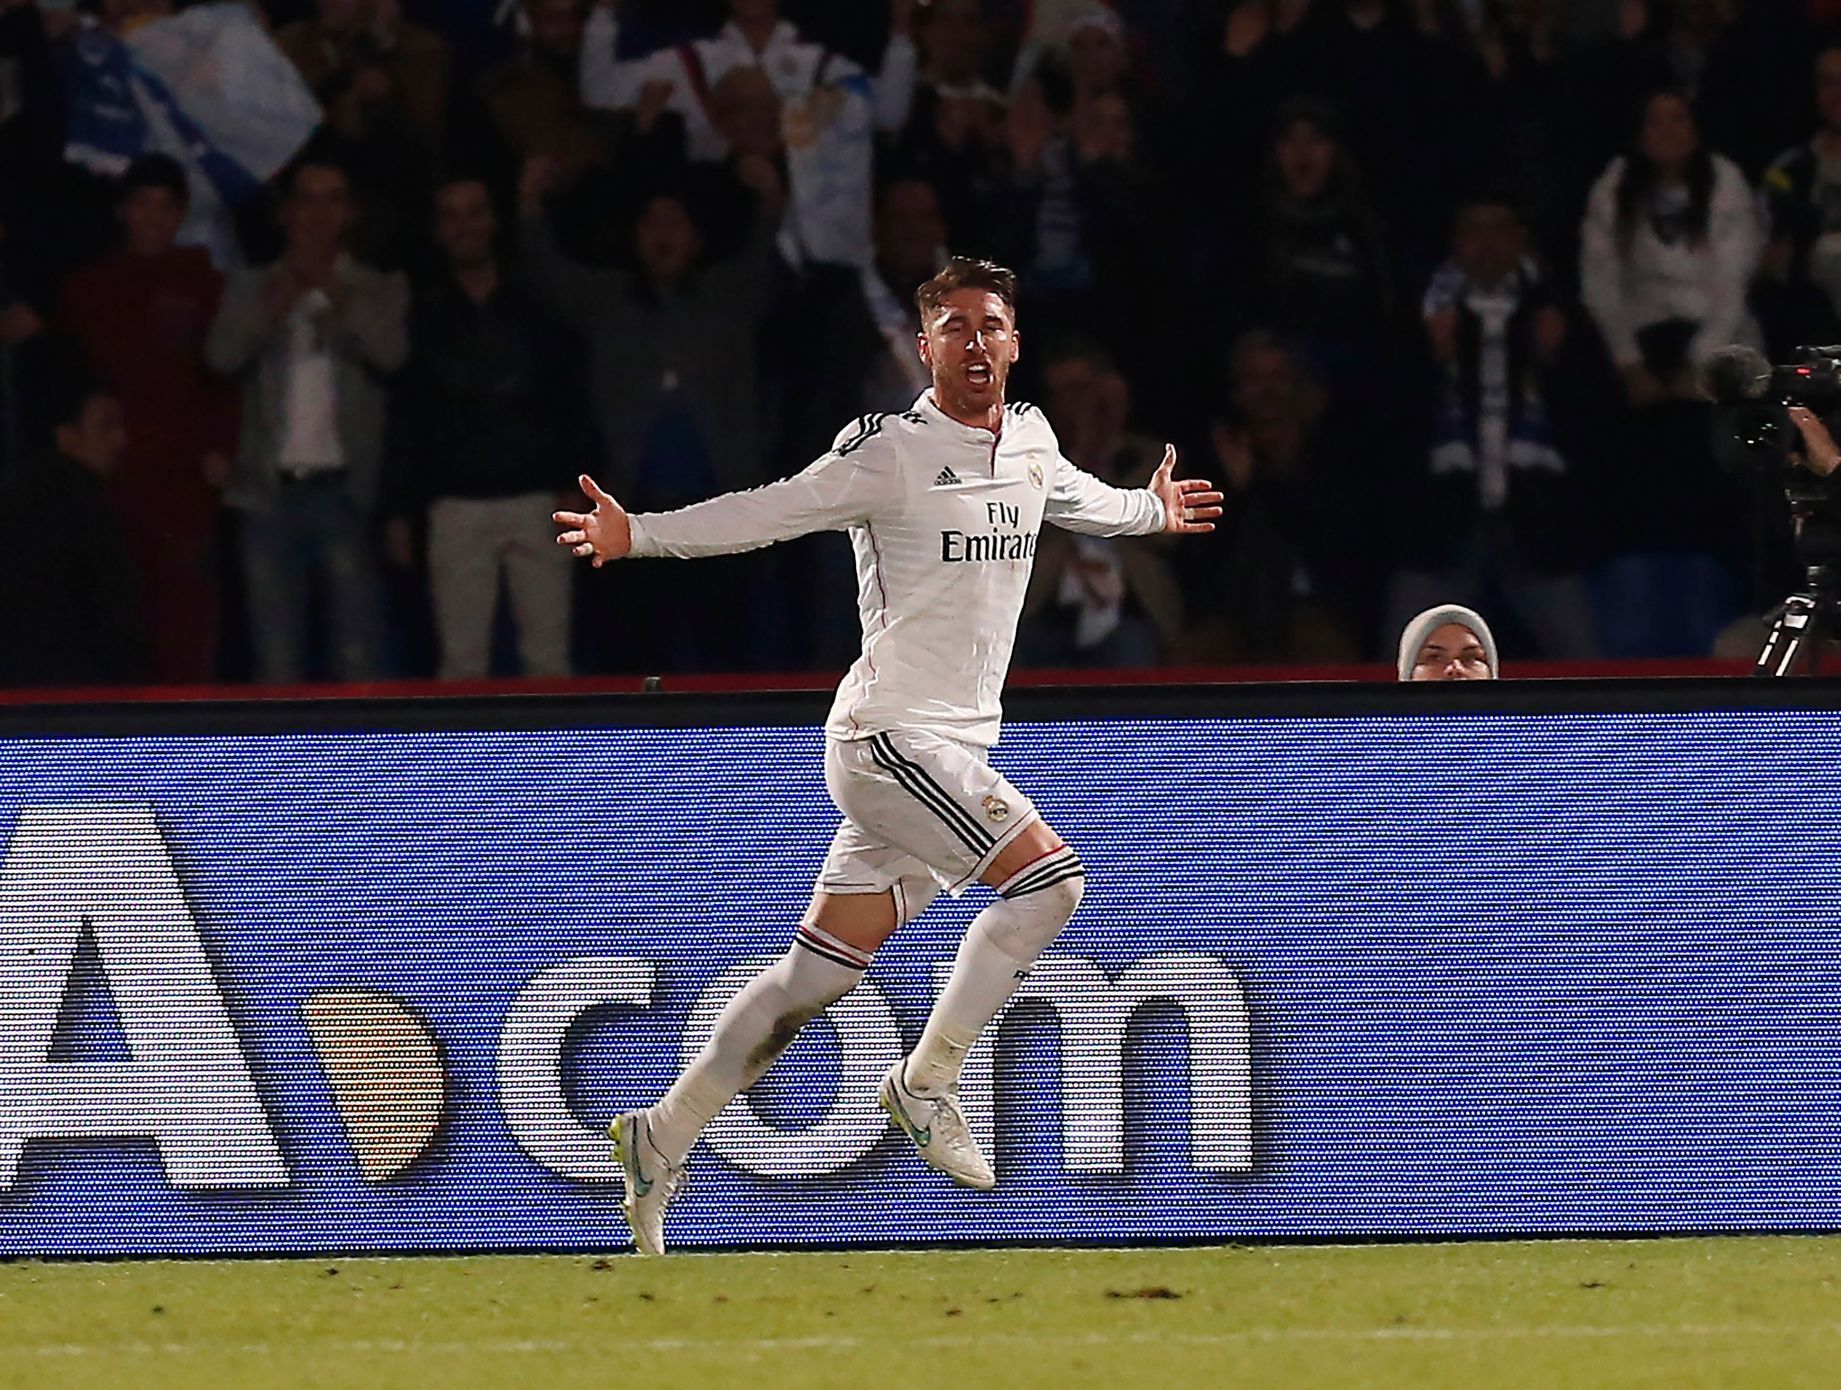 Real Madrid's Ramos celebrates his goal during their Club World Cup final soccer match against San Lorenzo at the Marrakech stadium